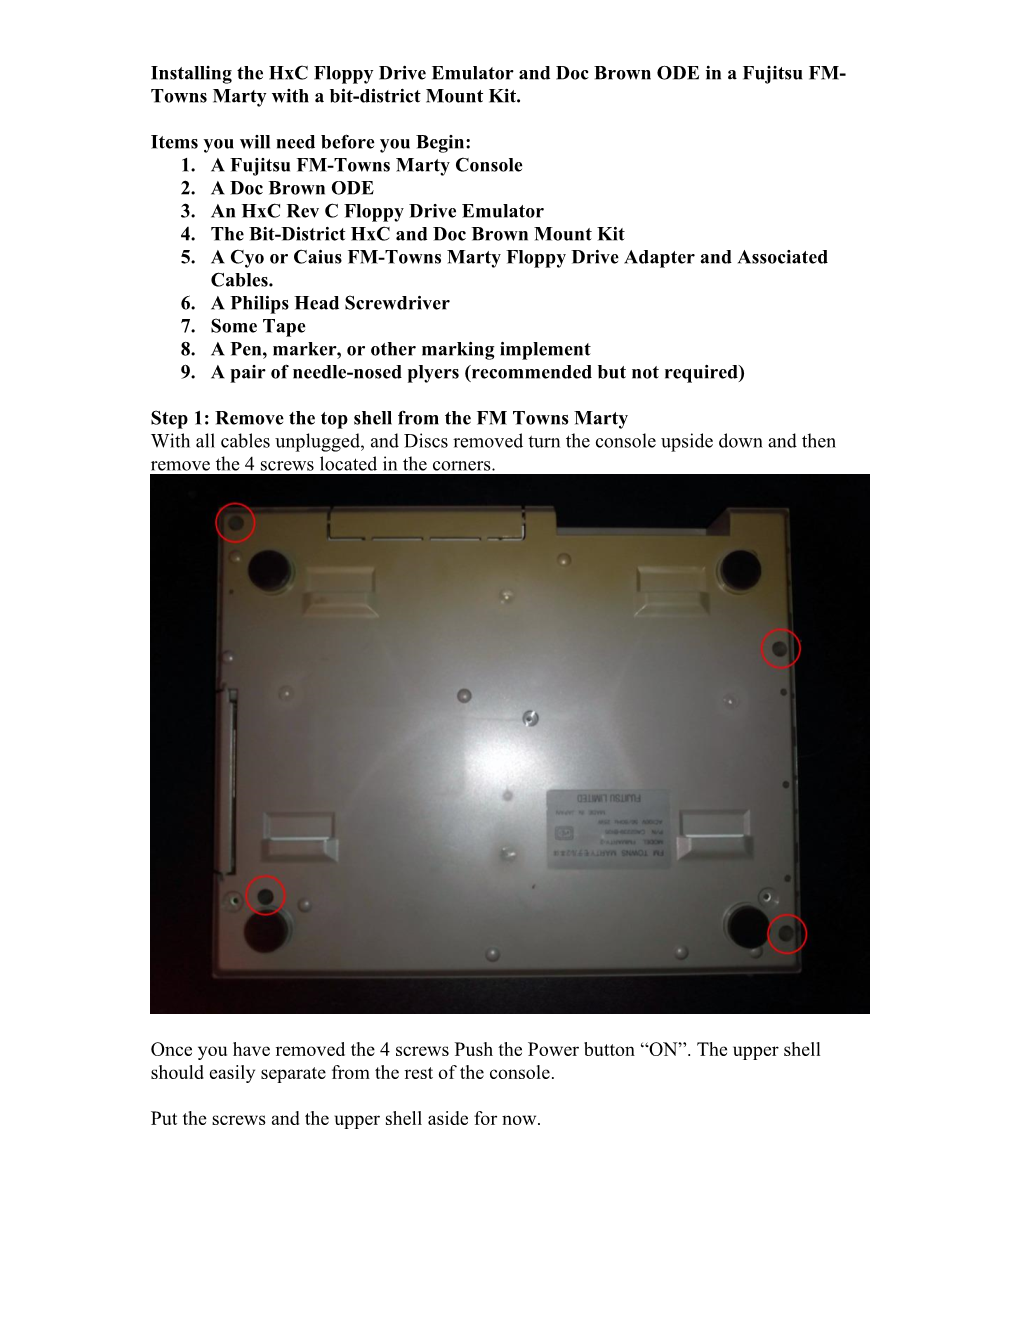 Installation Instructions for the Hxc and Doc Brown Mount